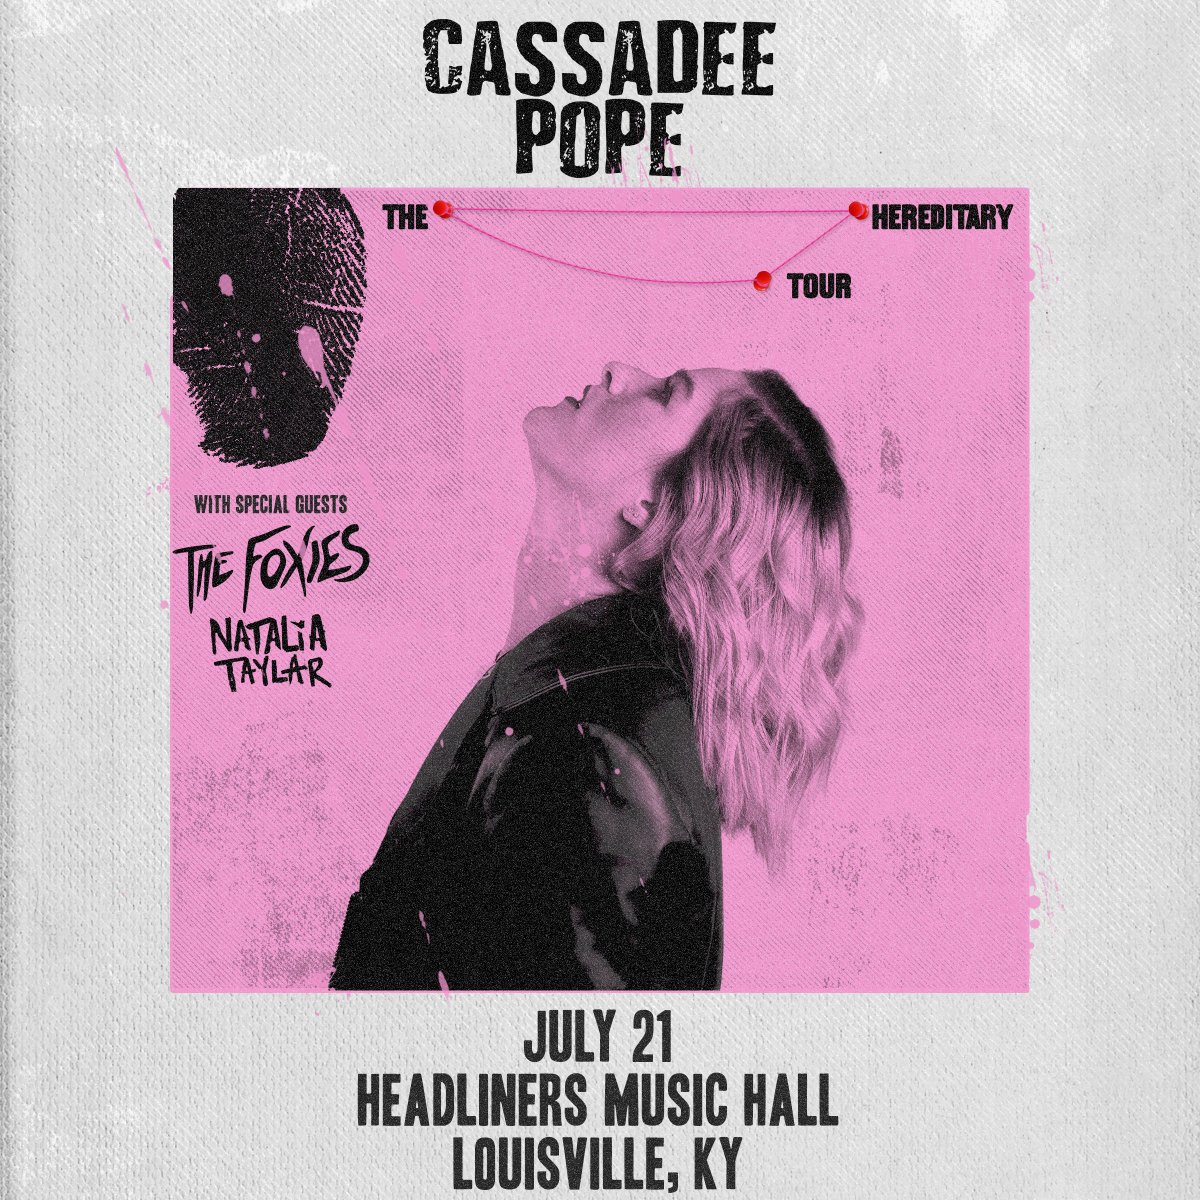 Just announced: @CassadeePope with @TheFoxiesMusic and @NataliaTaylar at Headliners July 21st! Tickets go on sale tomorrow 5/7 at 10am- VIP available! bit.ly/casadeeHDL24